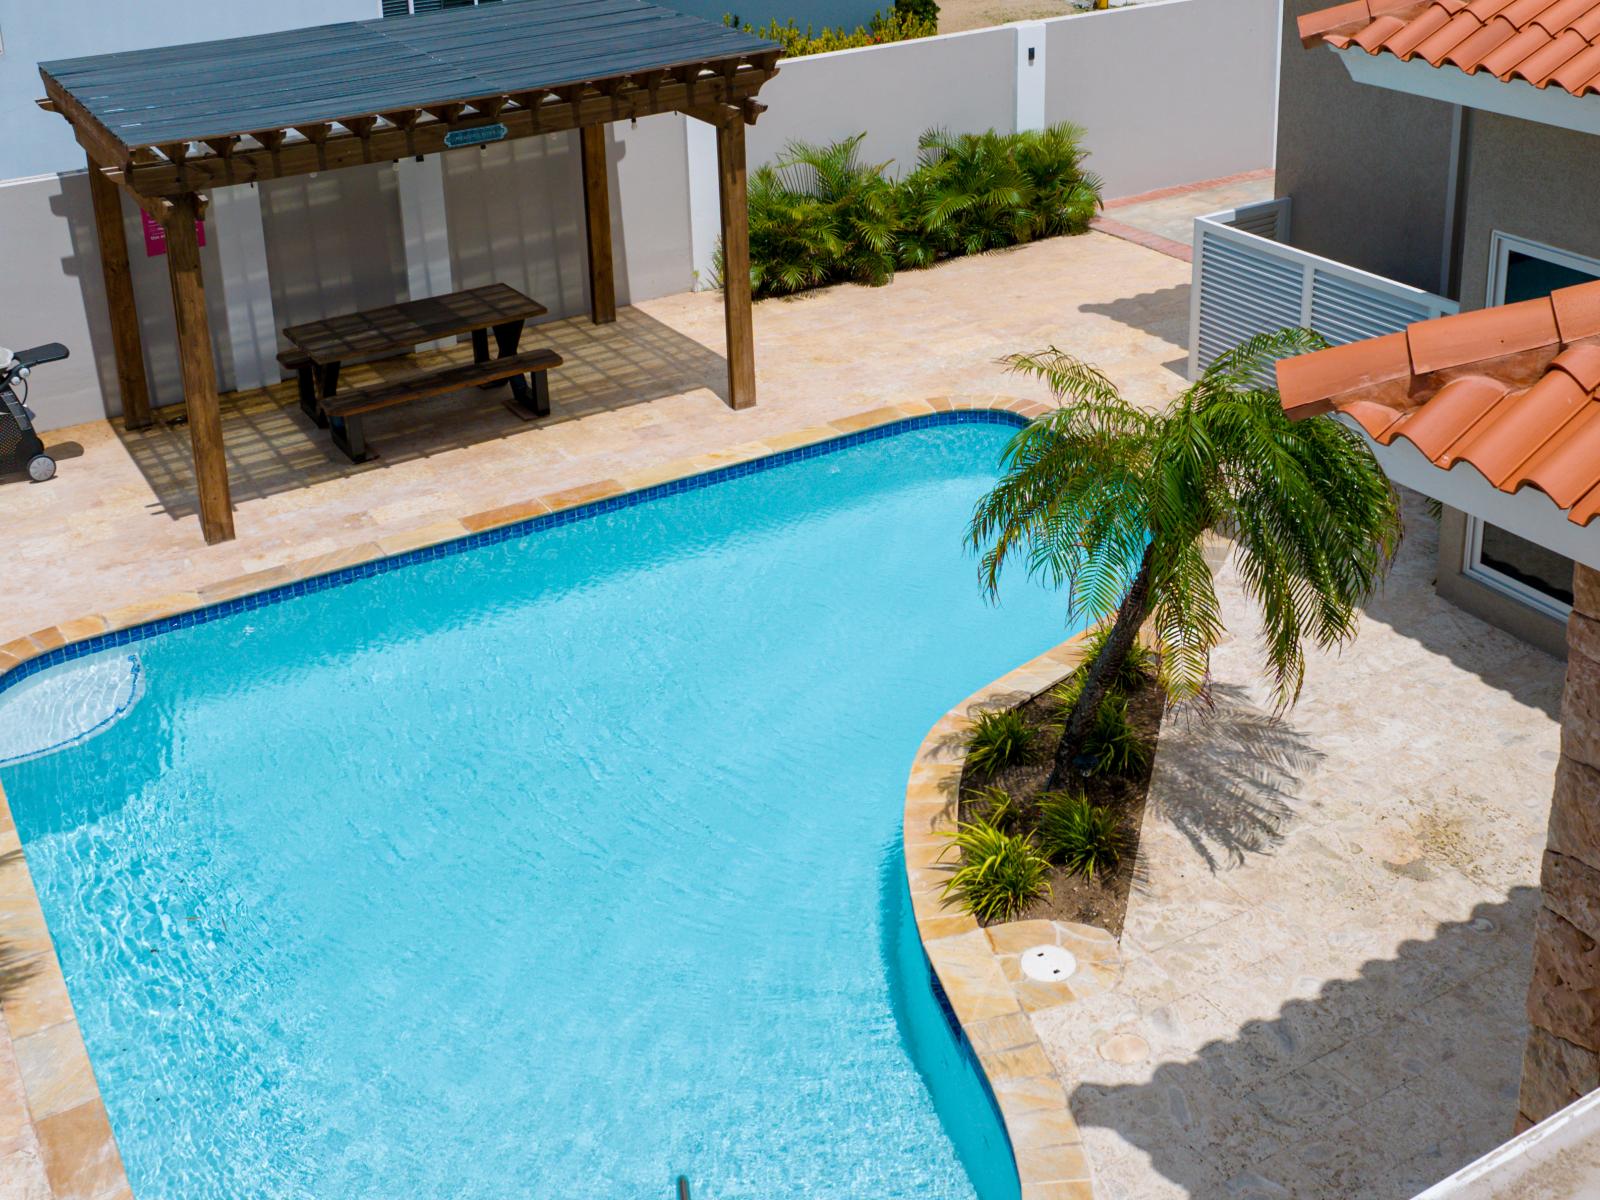 Captivating Pool Area of the Apartment in Noord Aruba - A spot for friends and family to gather and socialize - Palm trees and tropical plants enhance the vacation feel - The spacious backyard provides ample room for relaxation